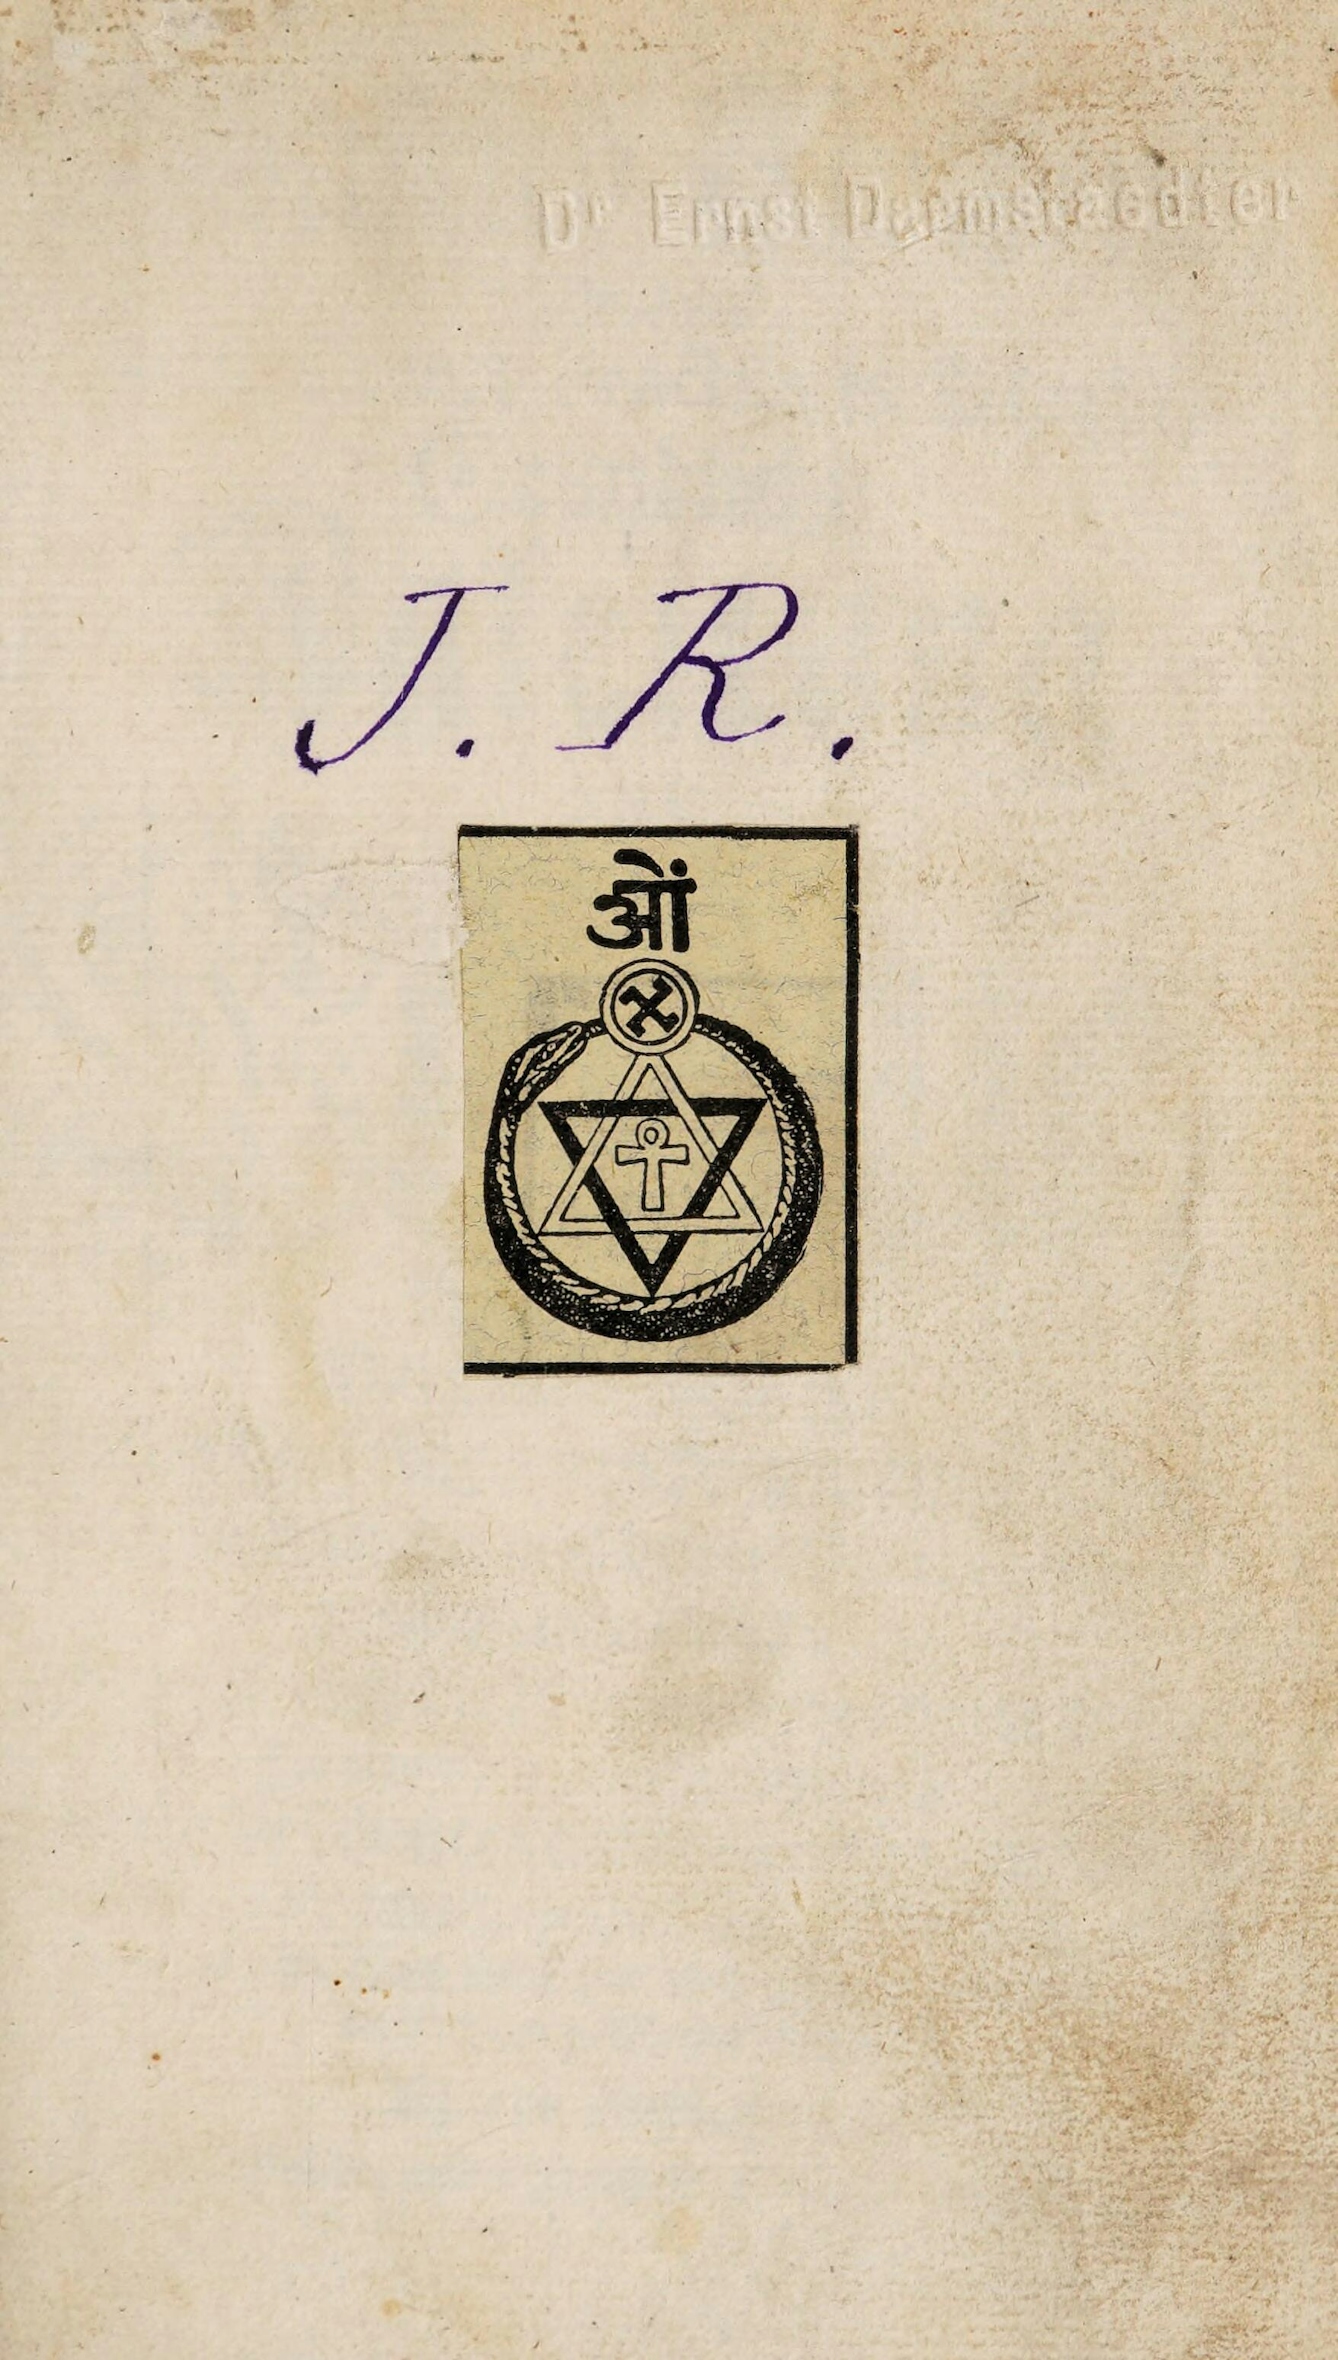 Bookplate on the centre of a page from a book.  The bookplate depicts a several mystic symbols and a snake eating its own tail.  Above the bookplate, the initials J.R. have been inscribed.